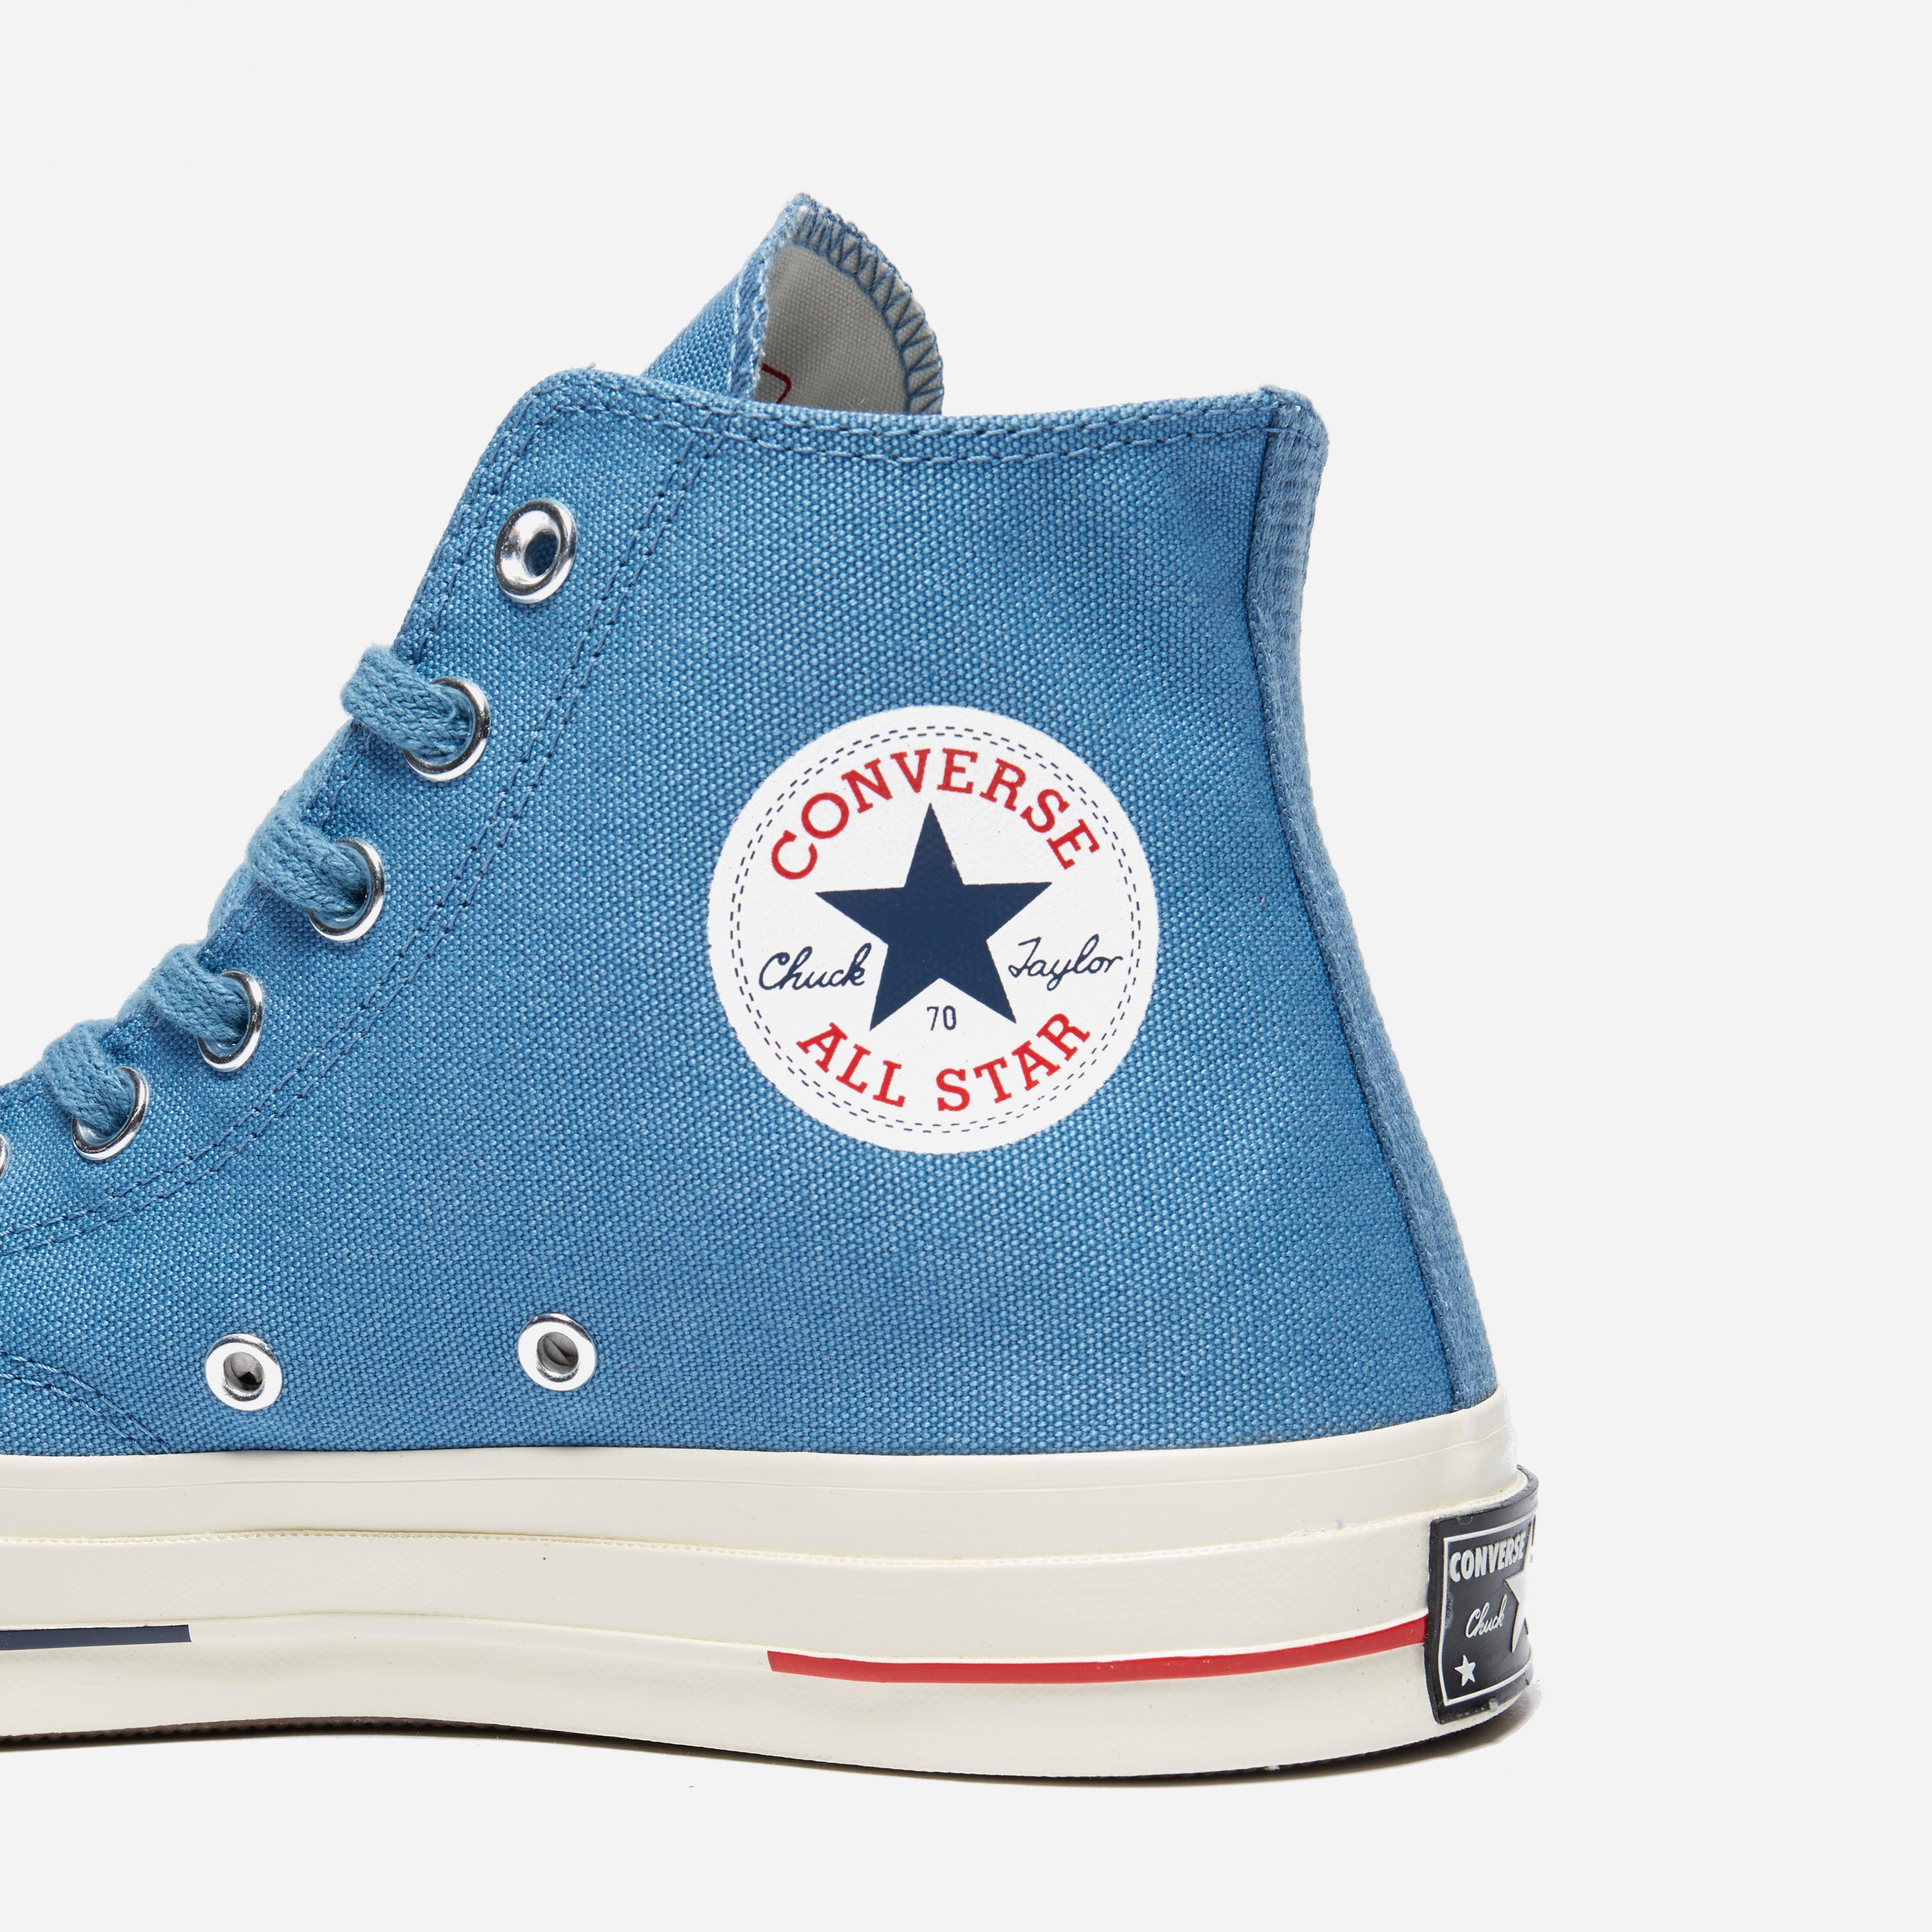 converse heritage,Quality assurance,protein-burger.com